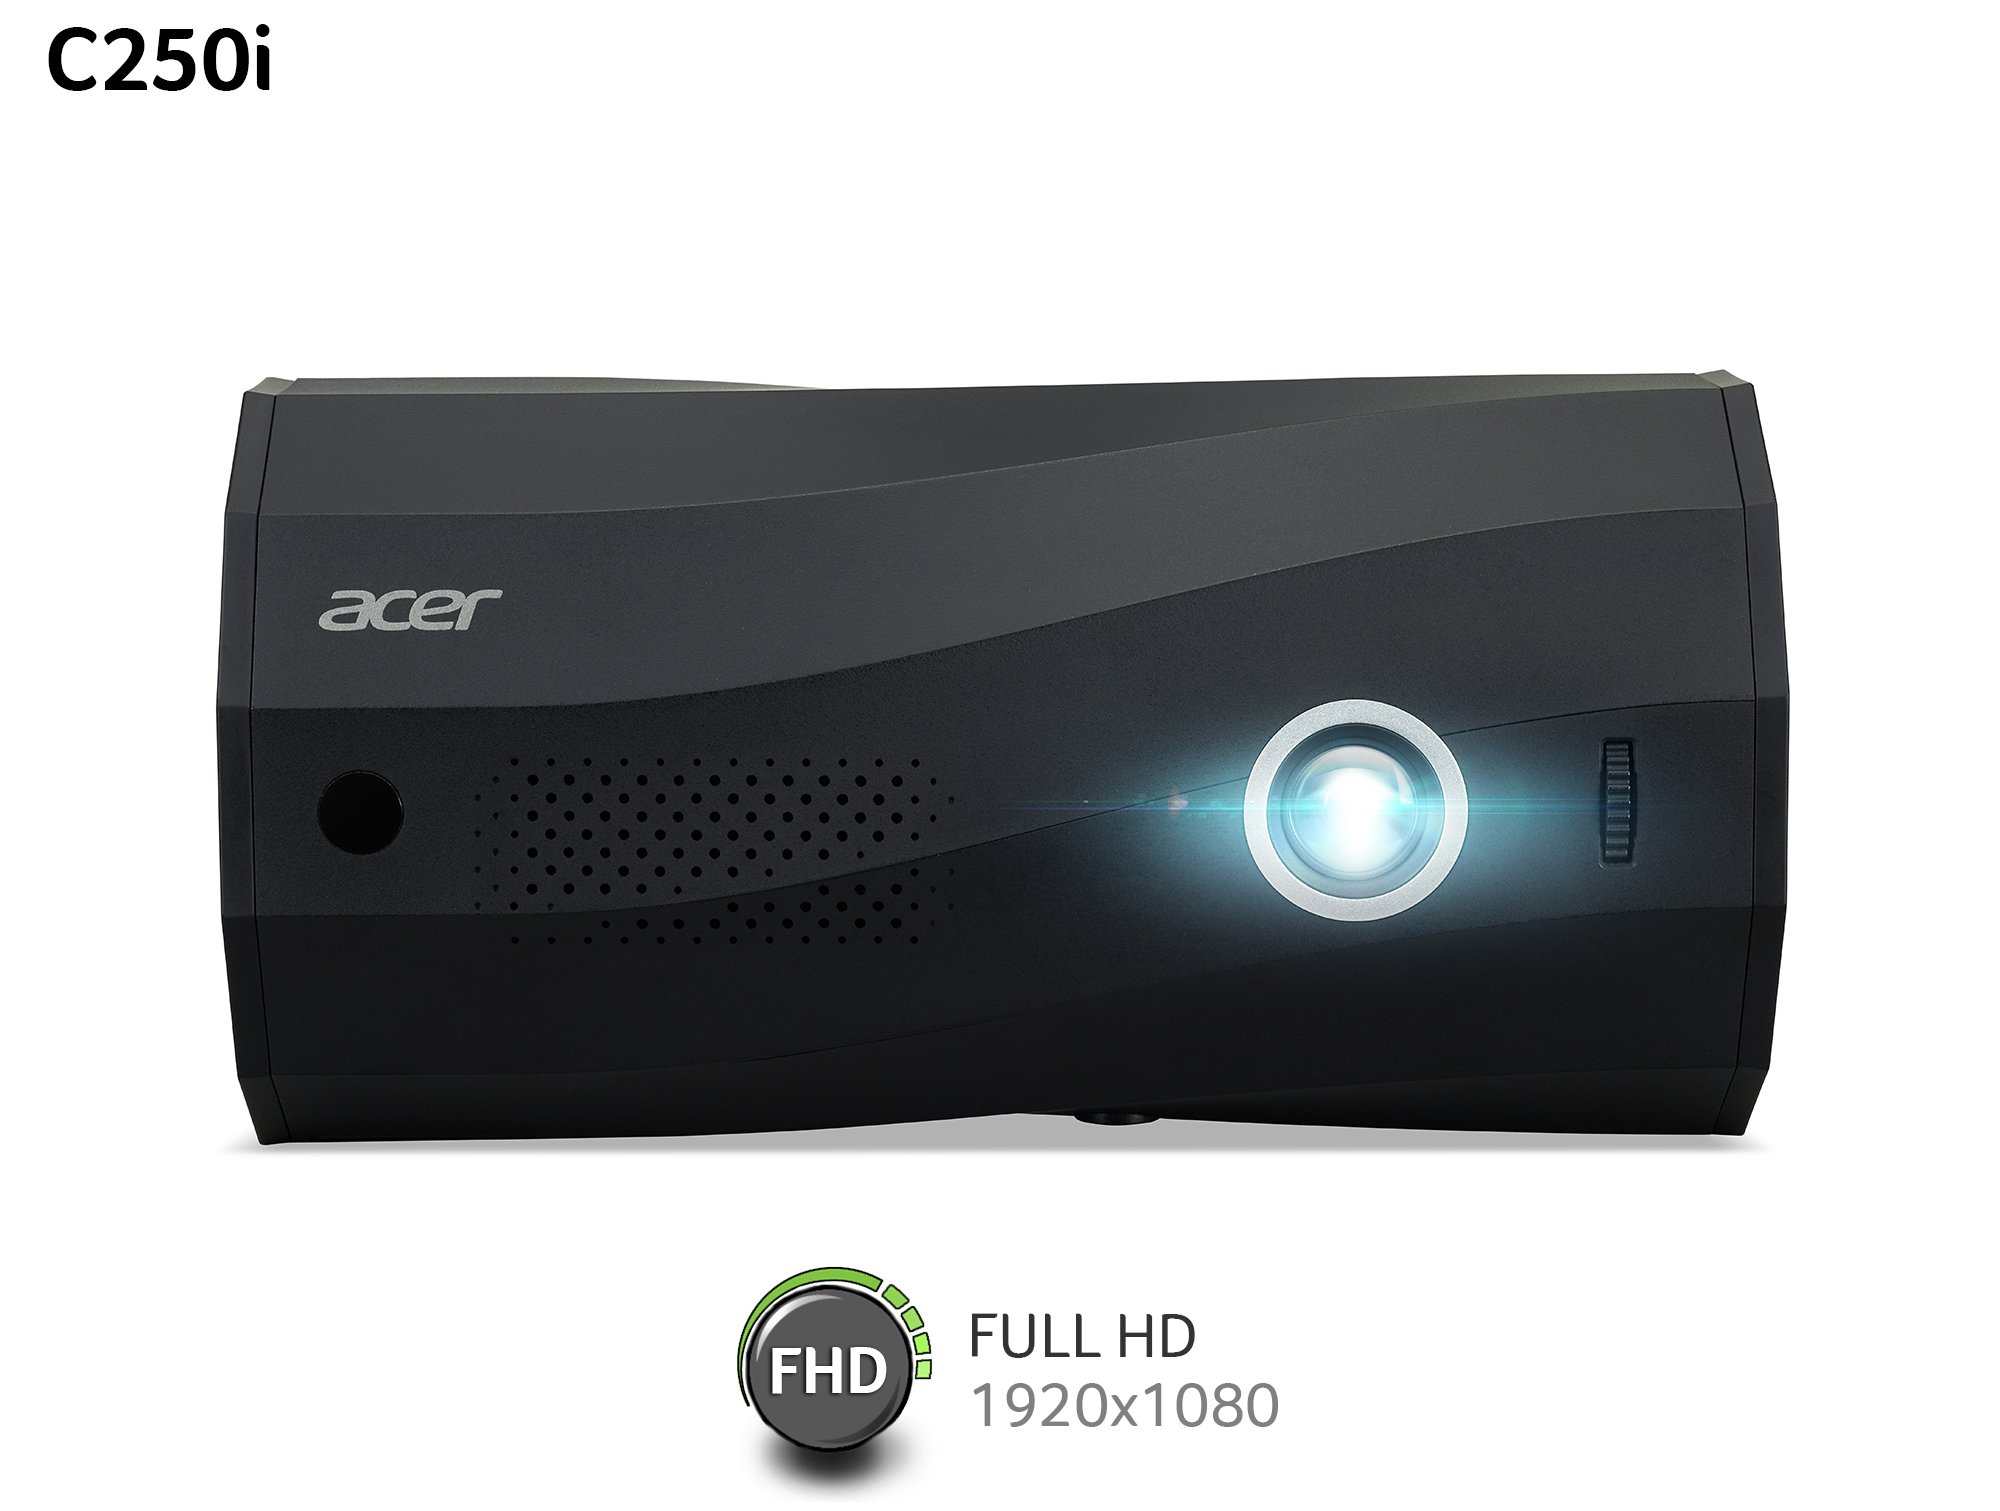 Acer C250i LED Projector Review